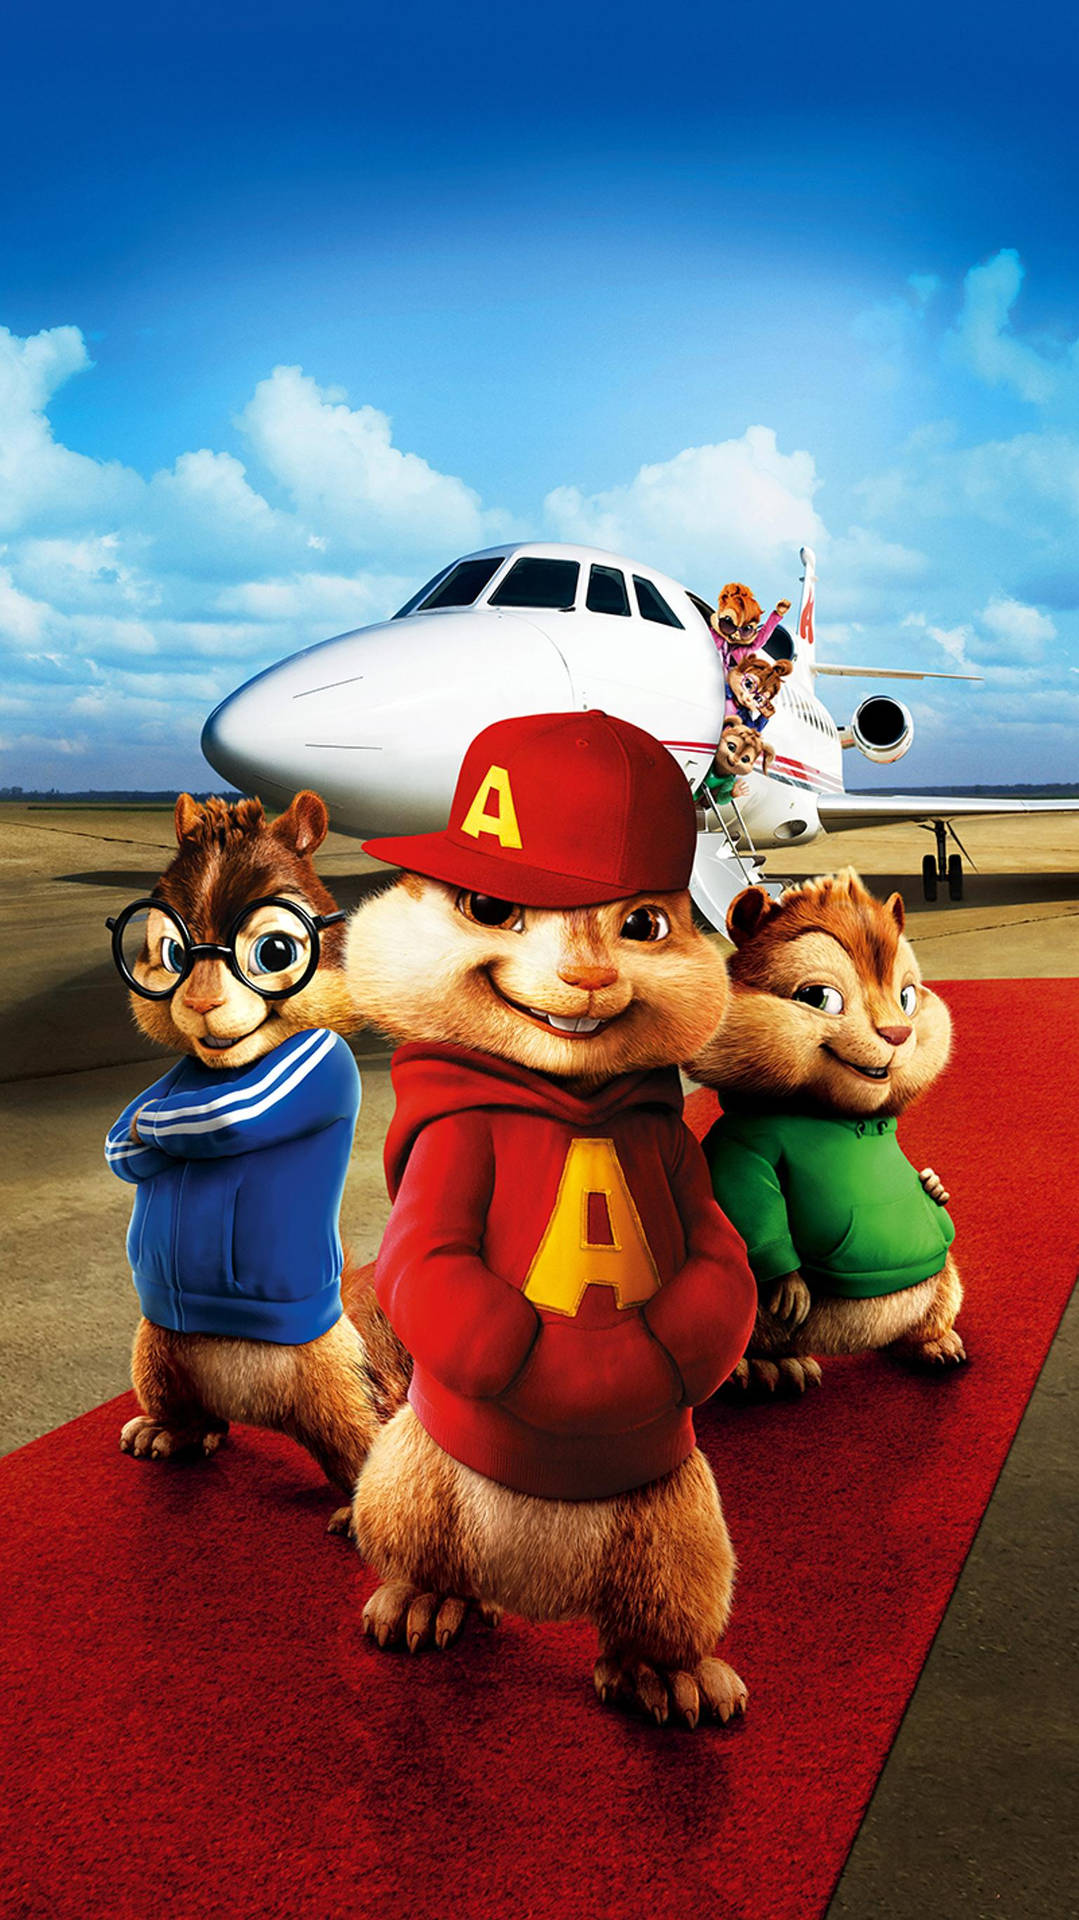 Alvin And The Chipmunks Airplane Background